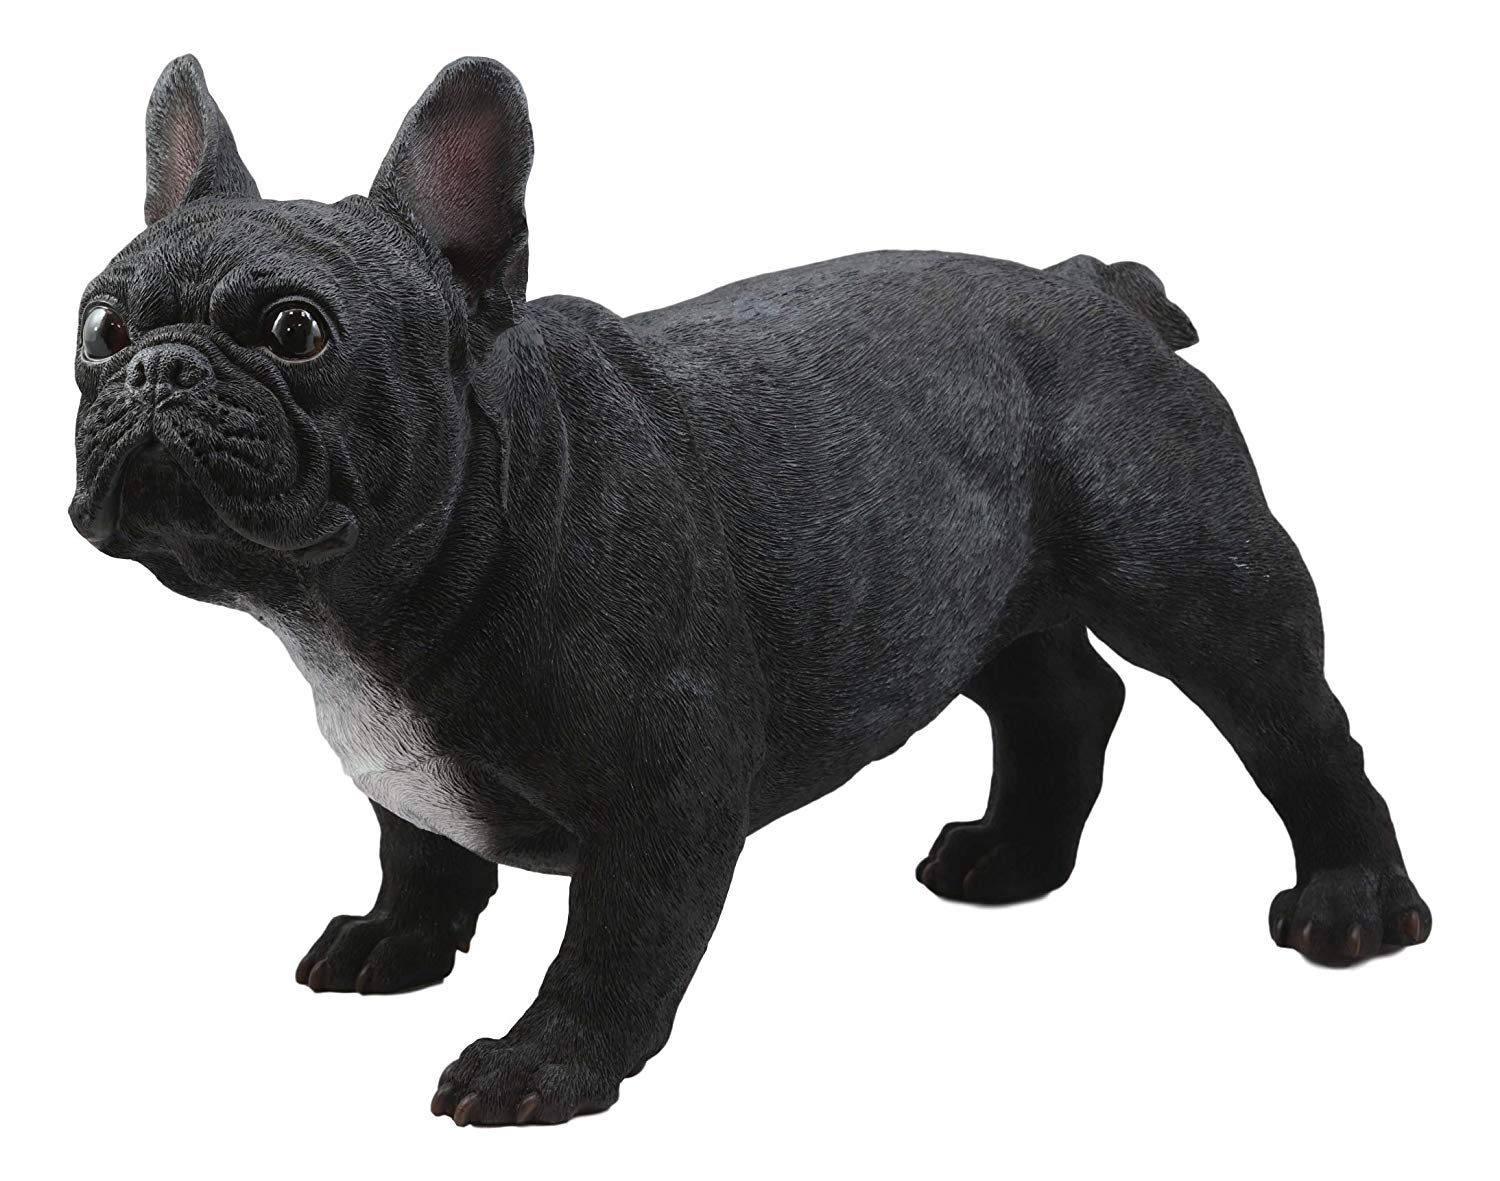 Ebros Adorable Large Lifelike Realistic Black French Bulldog Statue with Glass Eyes 19.5" Long Frenchie Figurine Pedigree Breed Animal Theme Dogs Puppy Puppies Sculpture - image 2 of 4